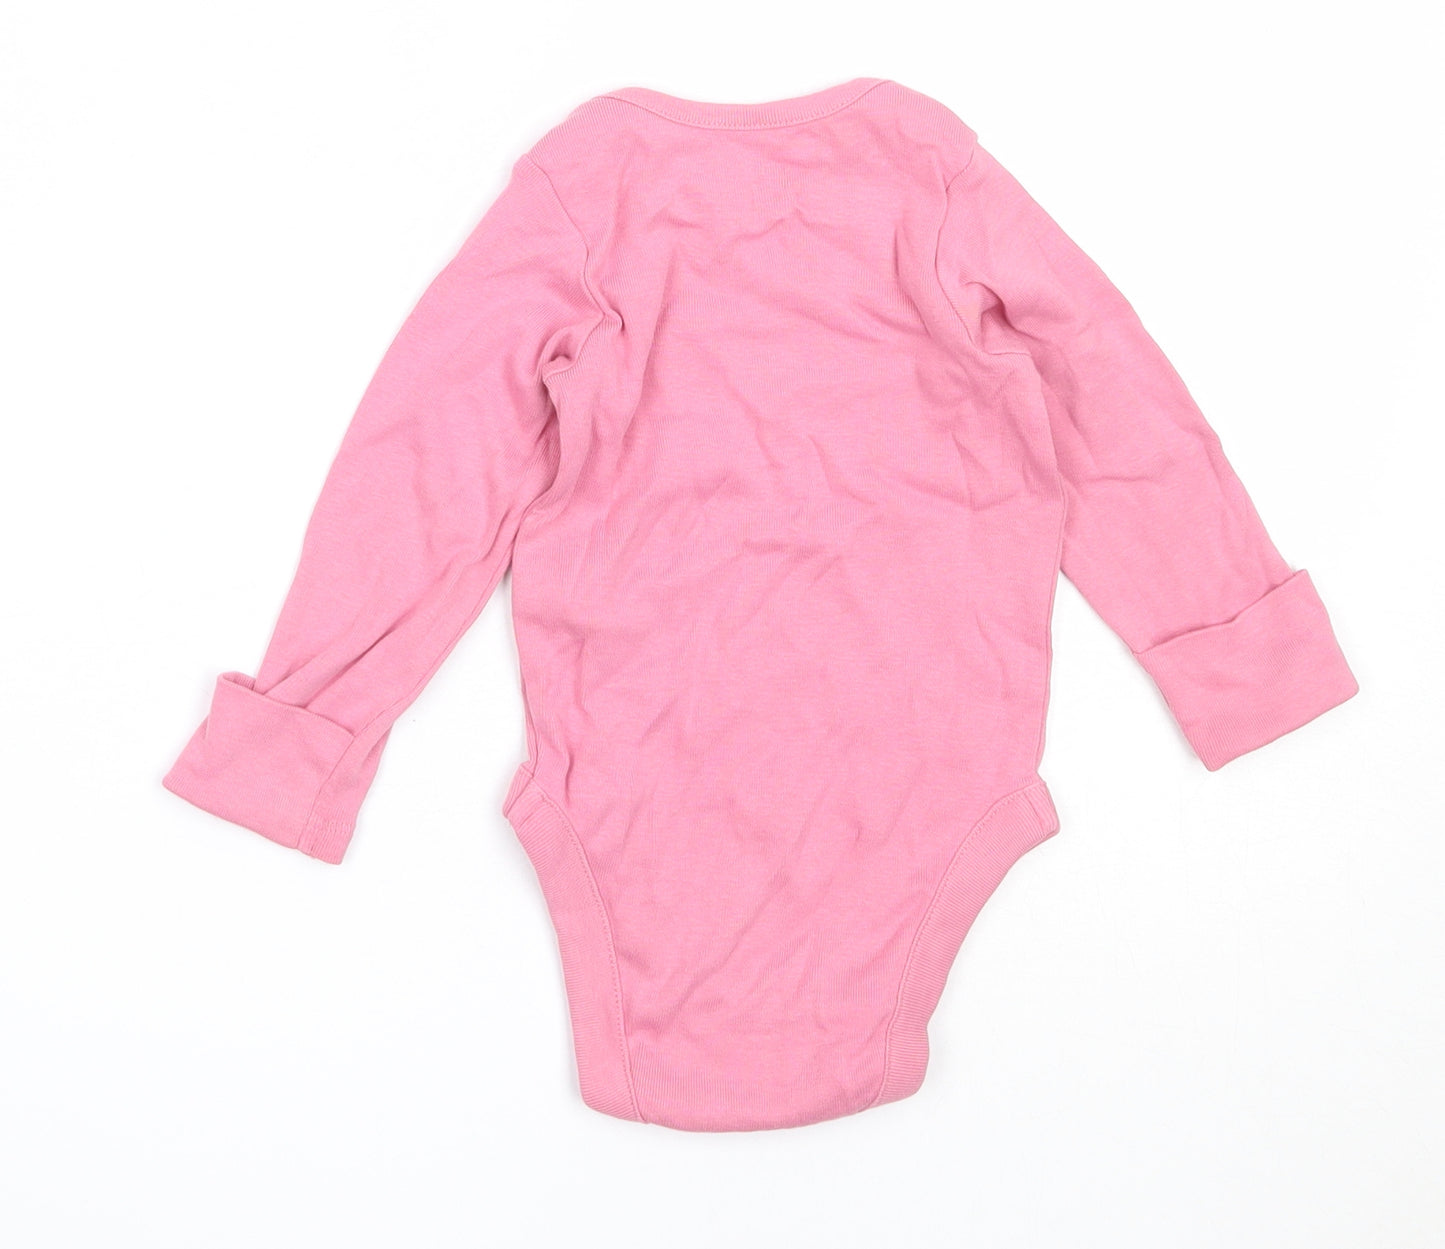 Marks and Spencer Girls Pink  Cotton Babygrow One-Piece Size 3-6 Months